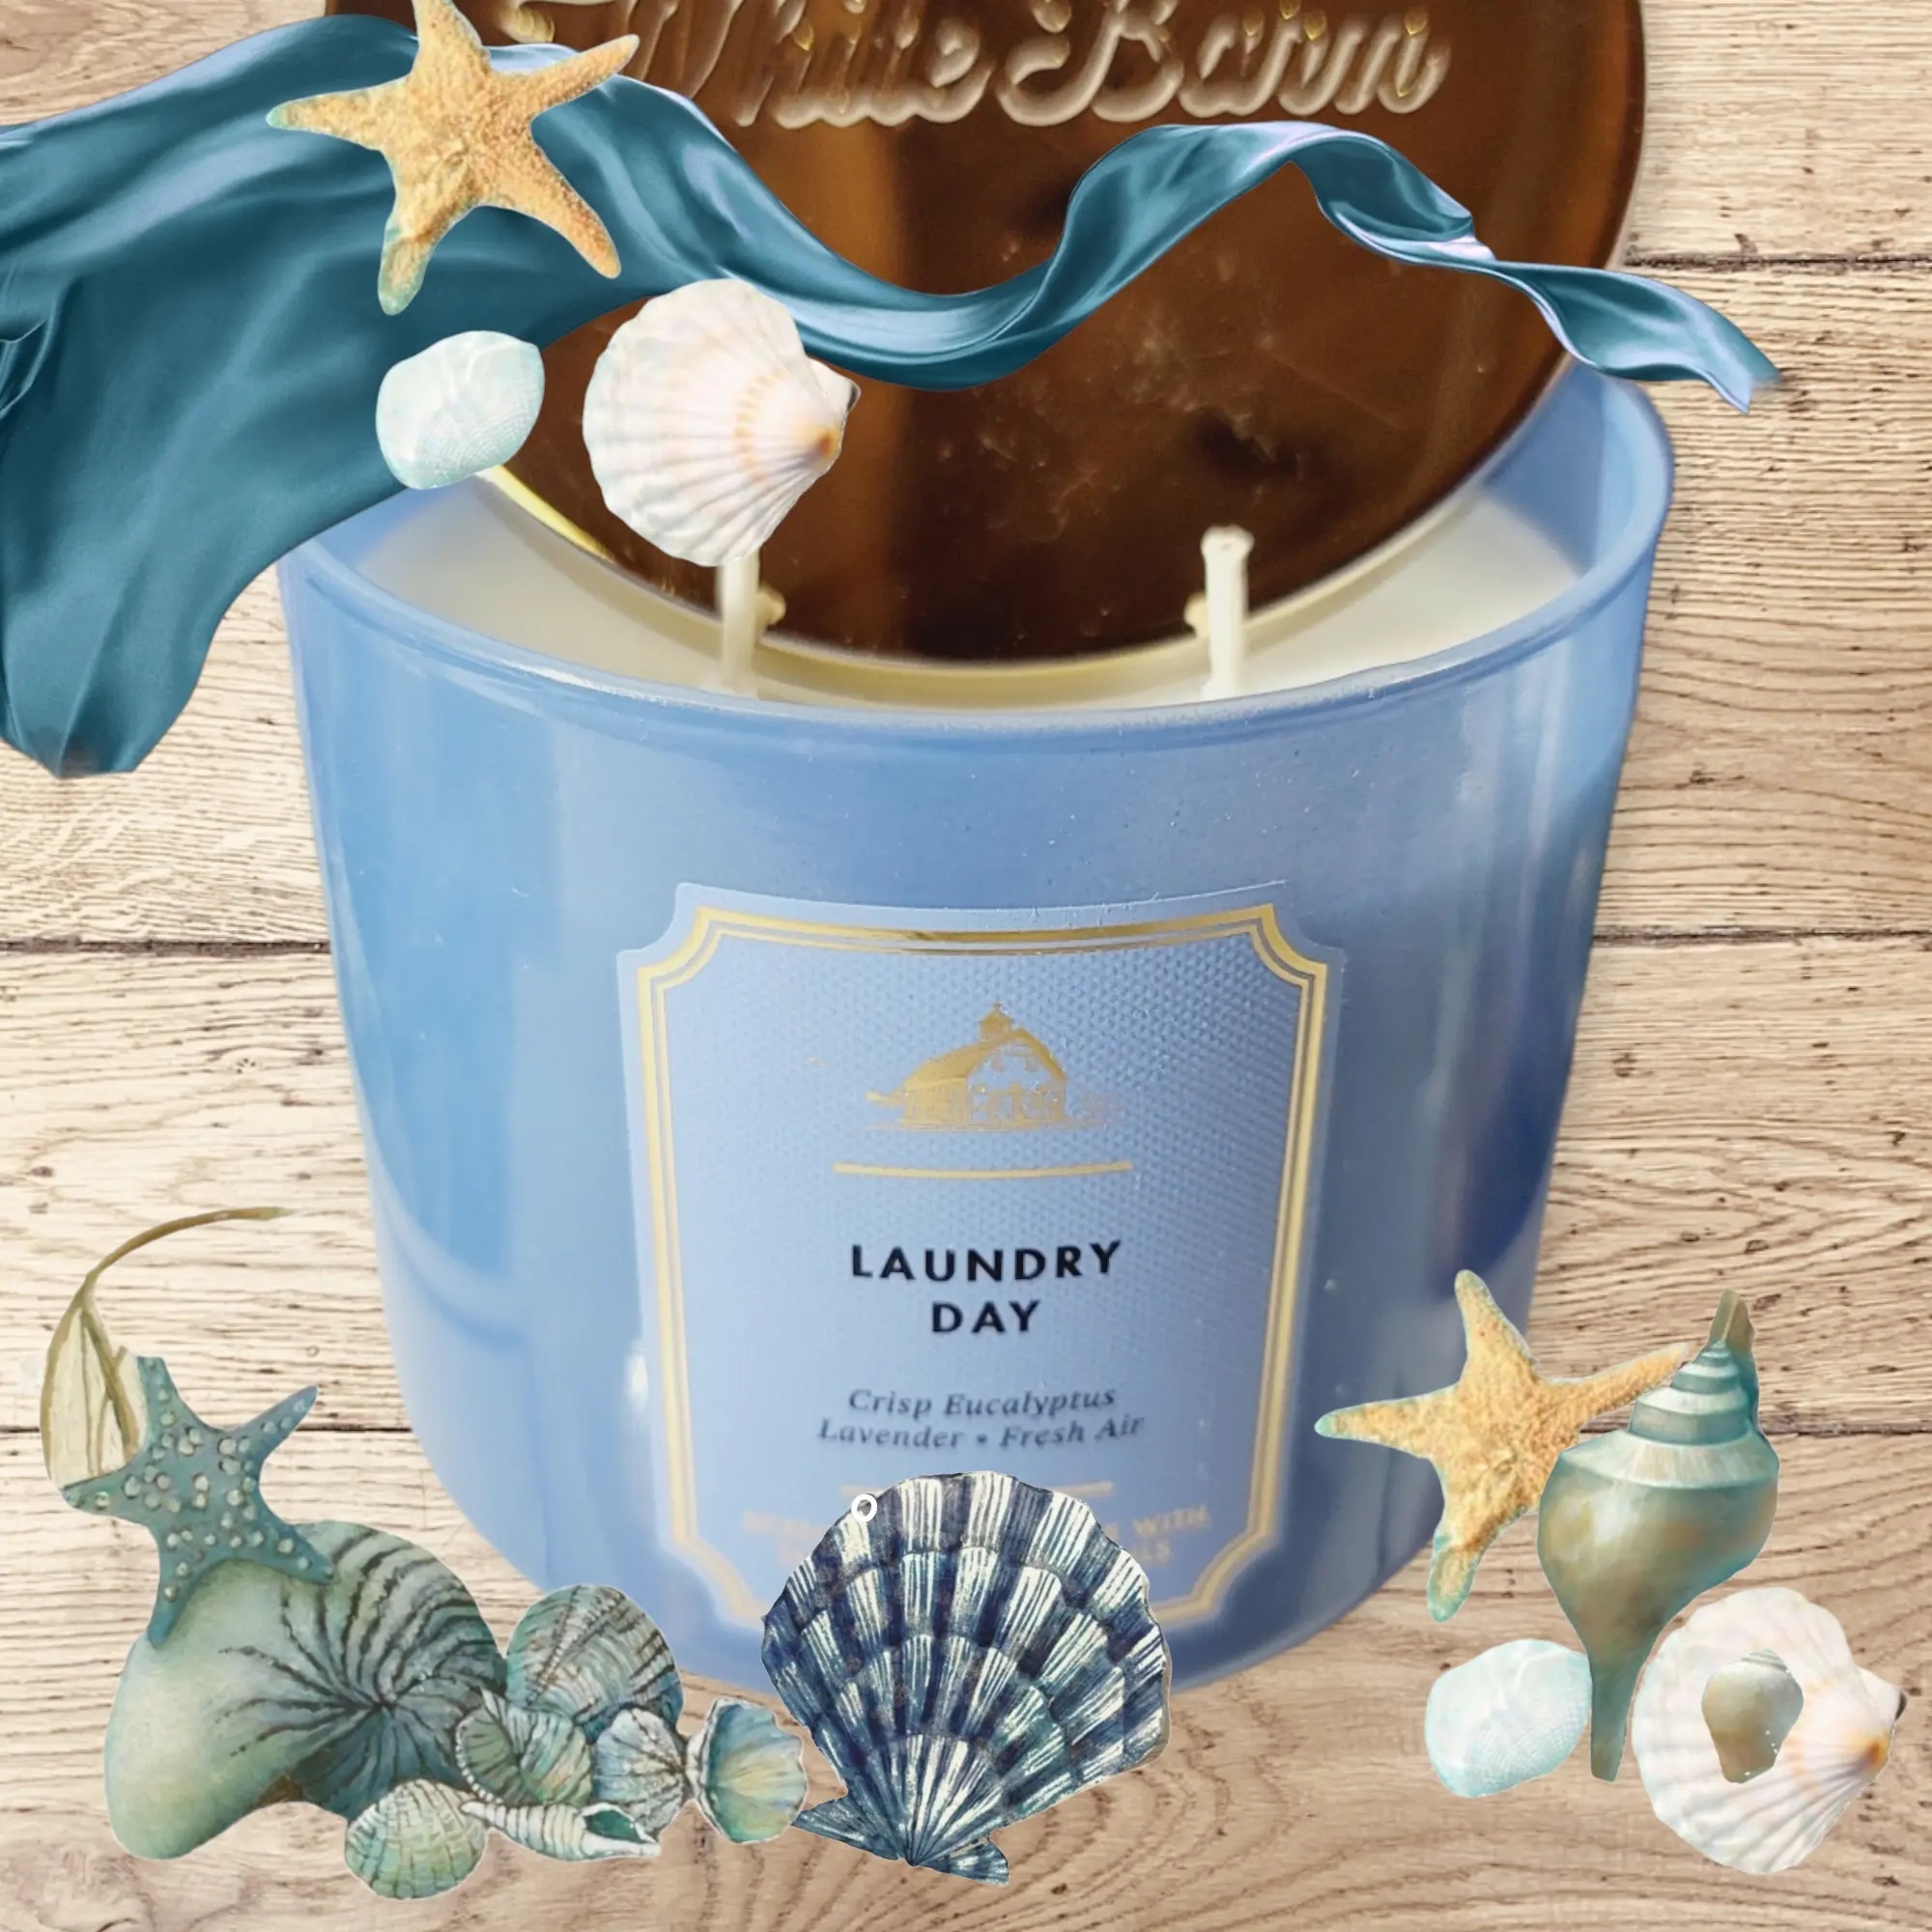 Laundry day 3 Wick Candle 2022